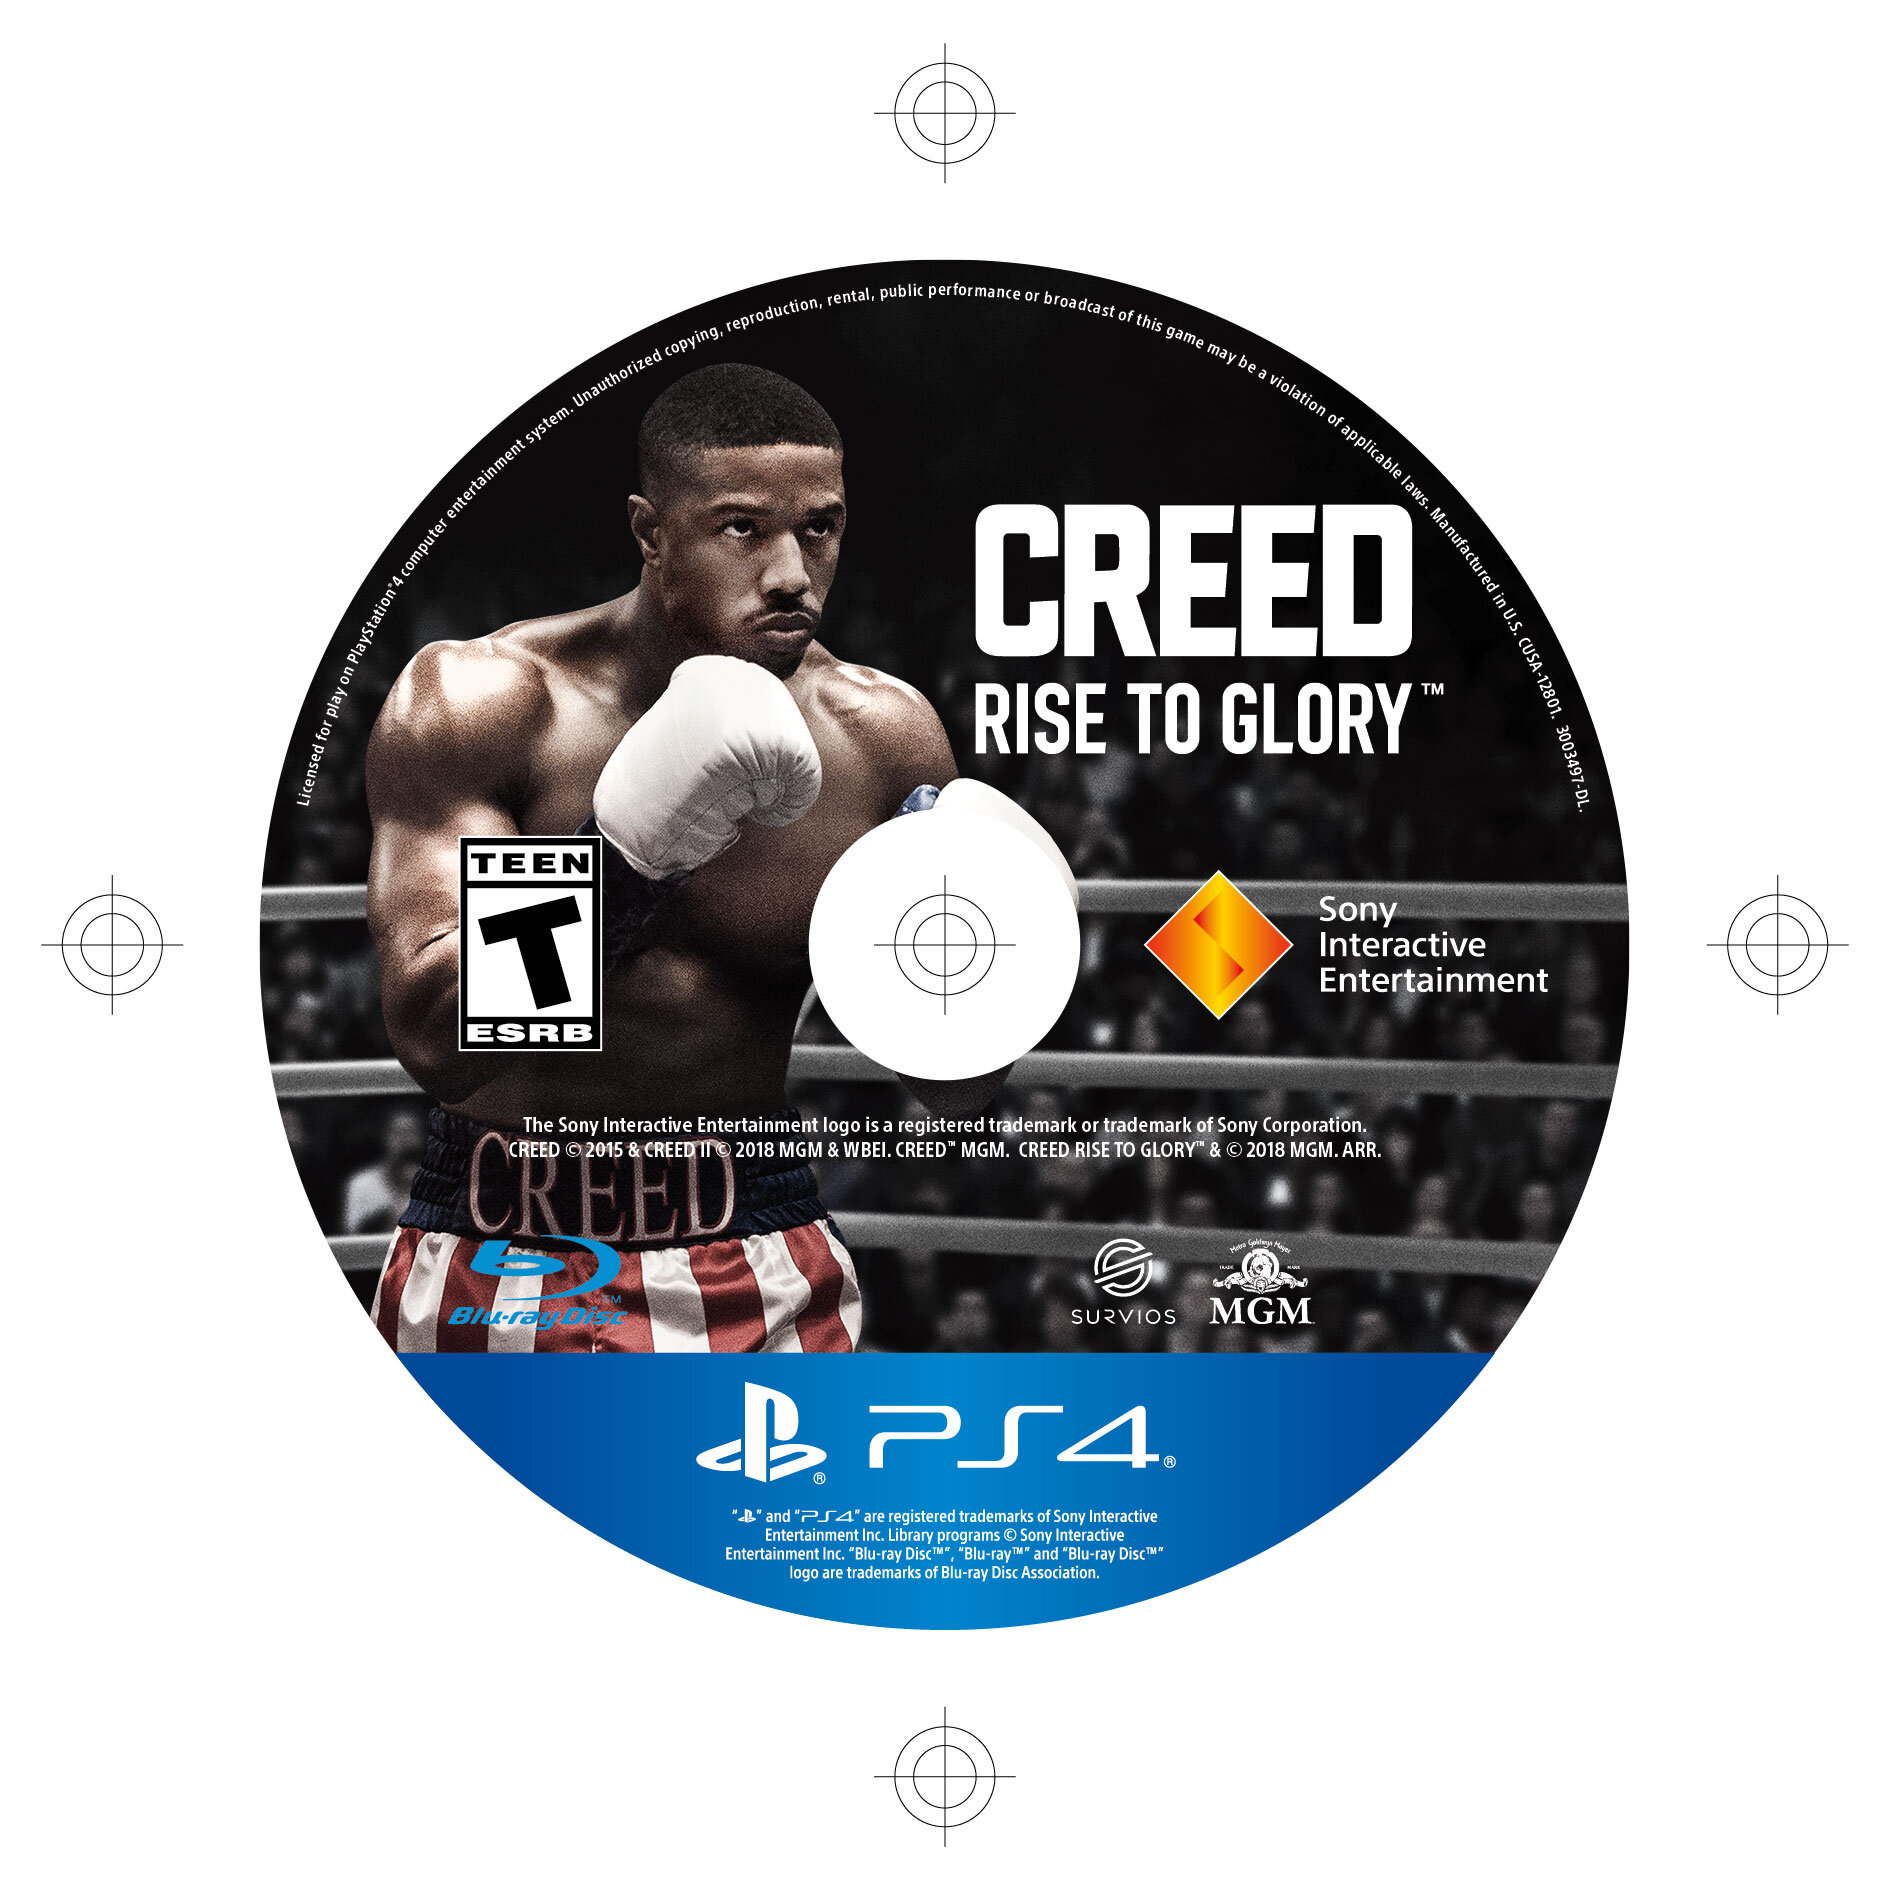 CREED_VR_PS4_DISC_US_004-01.jpg